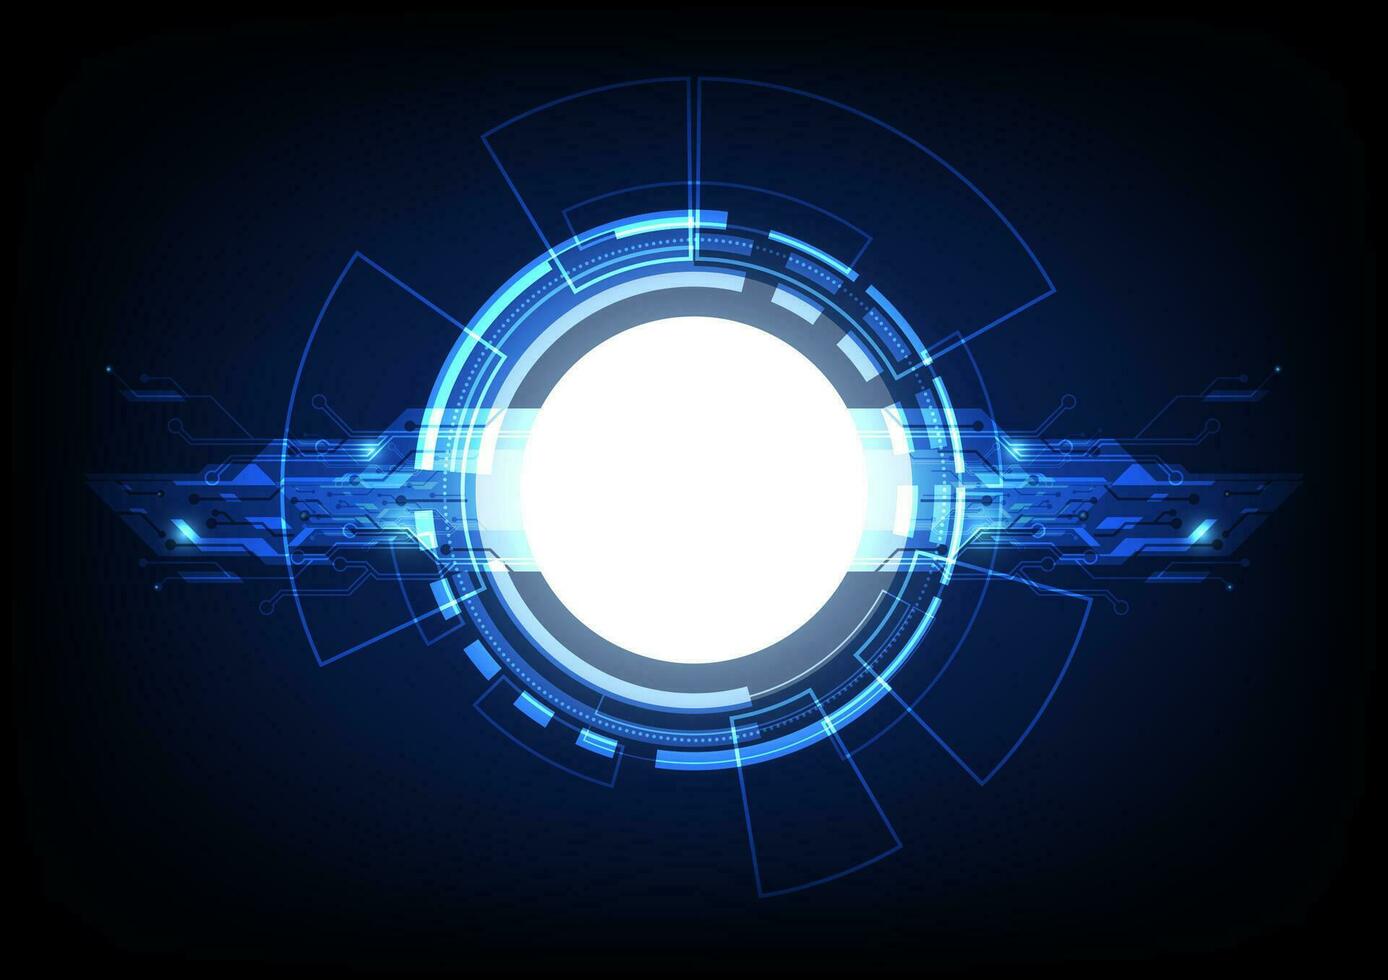 Abstract technology vector illustration background. Futuristic digital cyberspace innovation with circle HUD and circuit elements on dark blue background